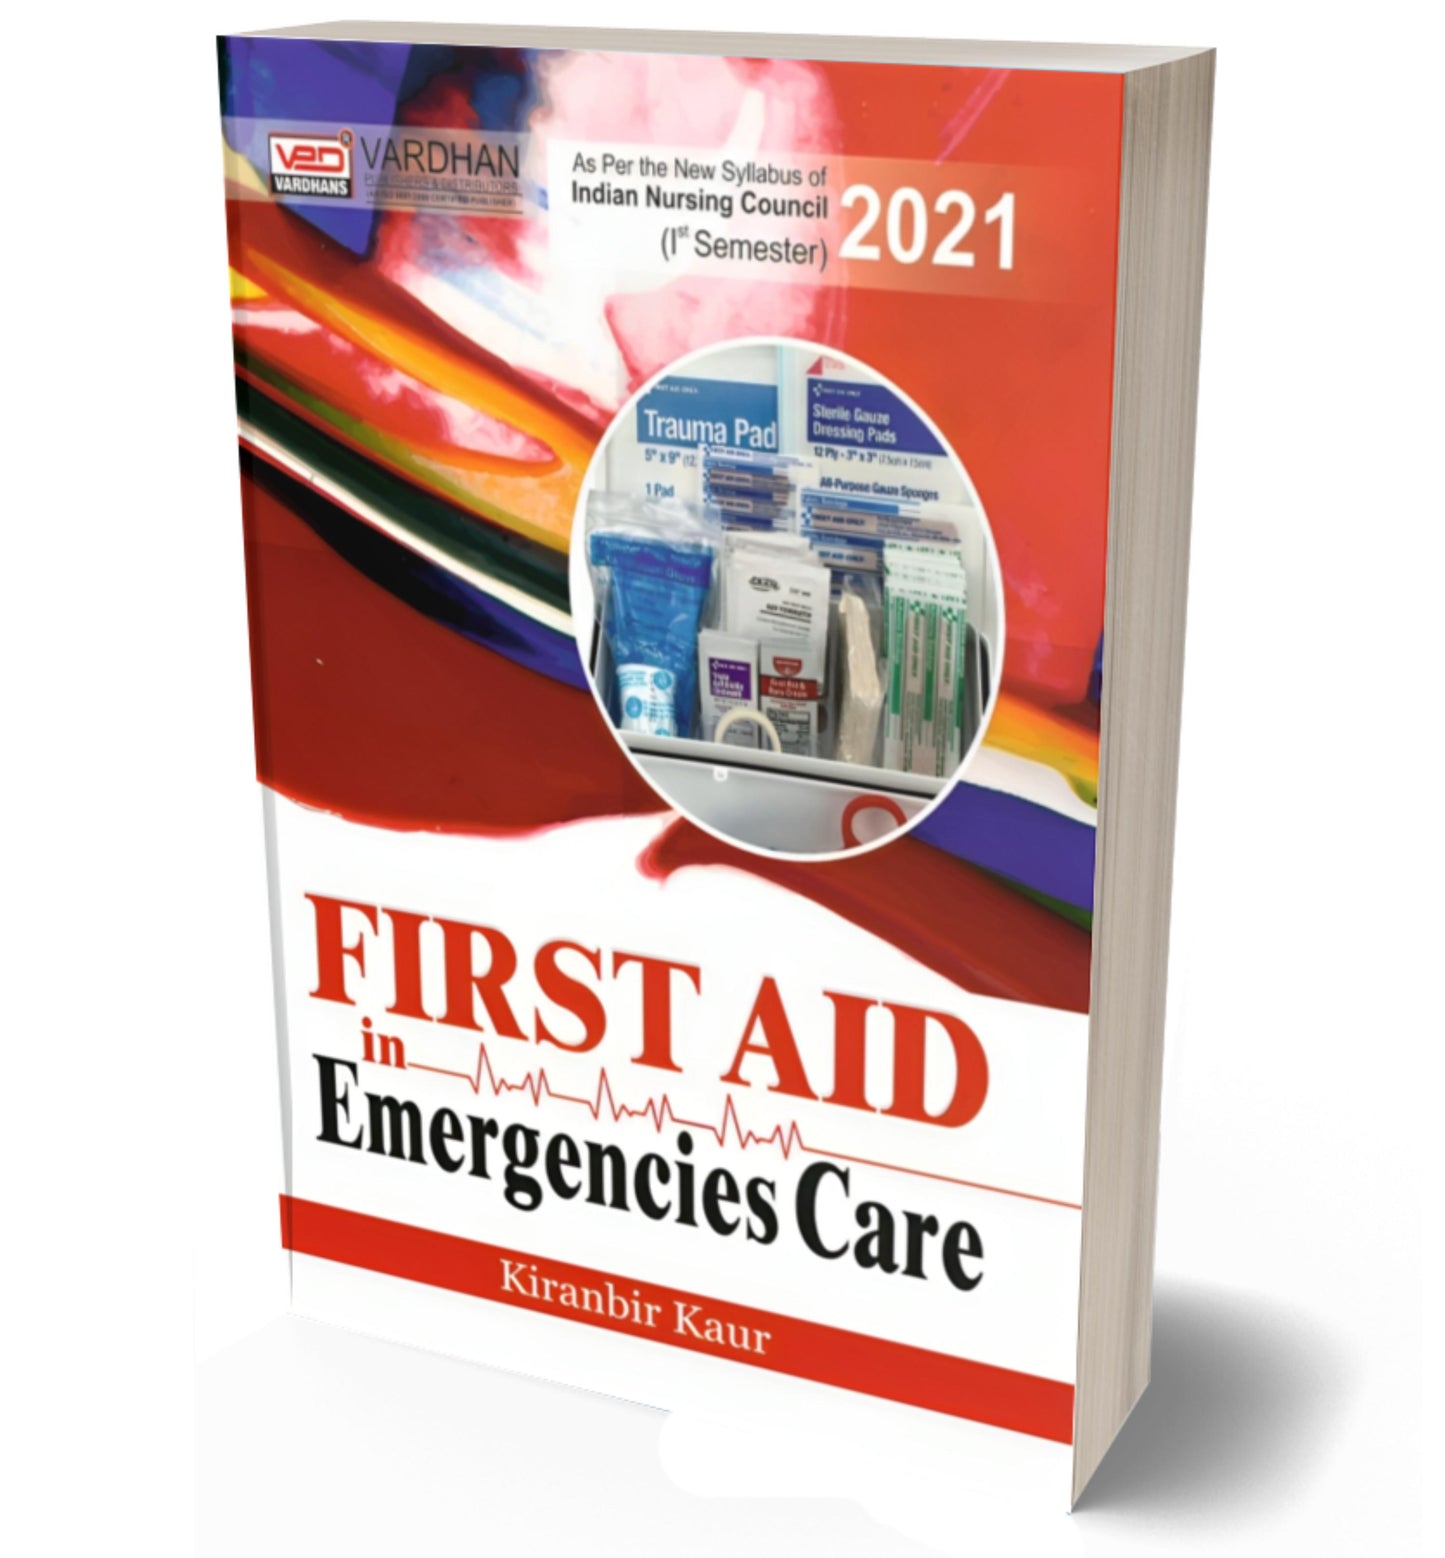 First Aid in Emergencies Care